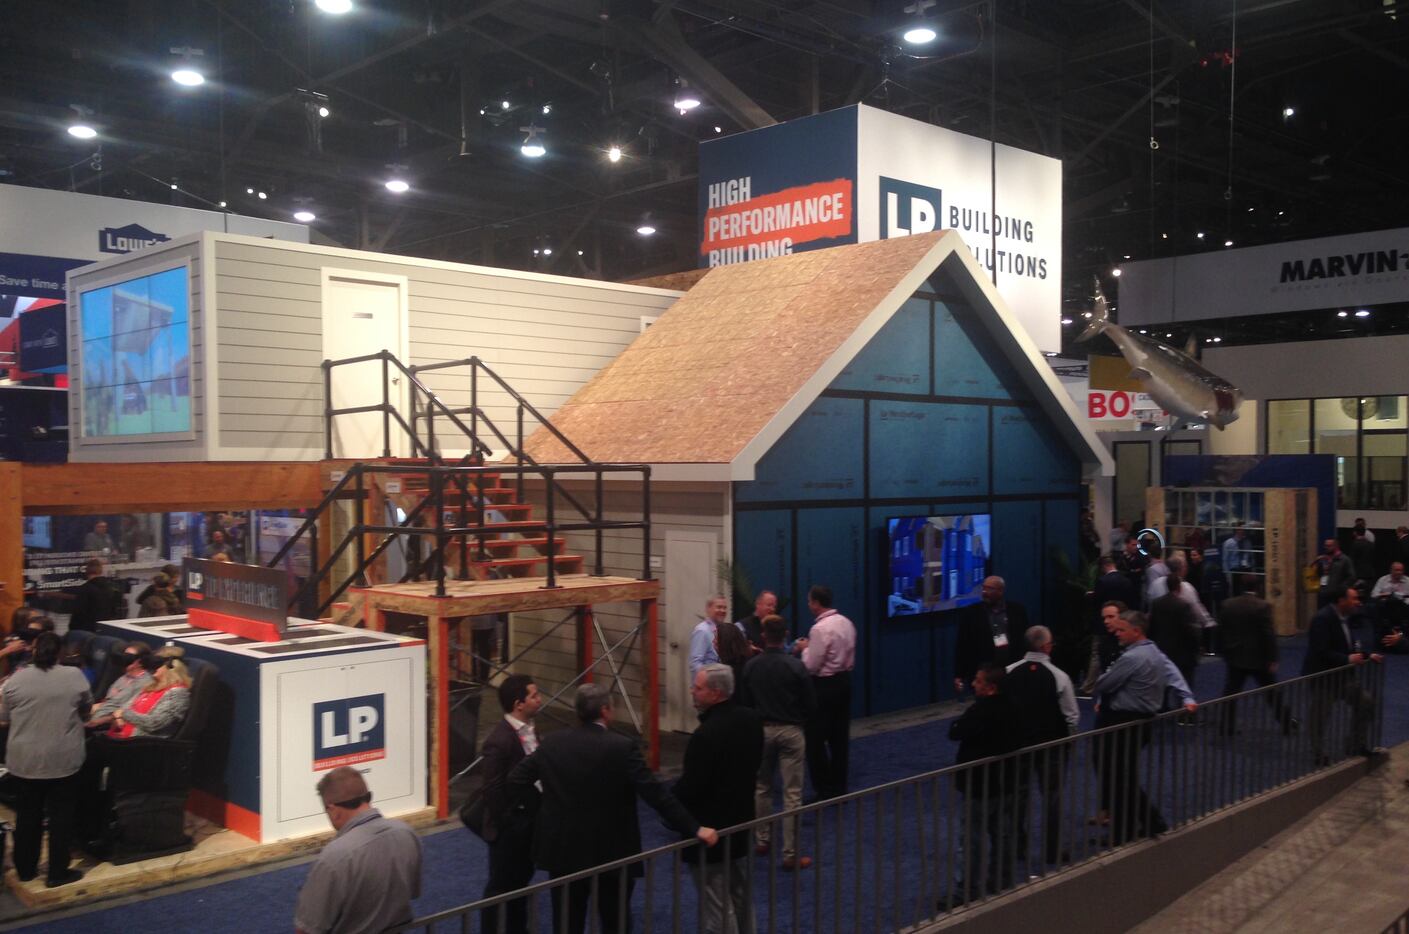 More than 90,000 housing industry professionals gathered for the annual builders show.